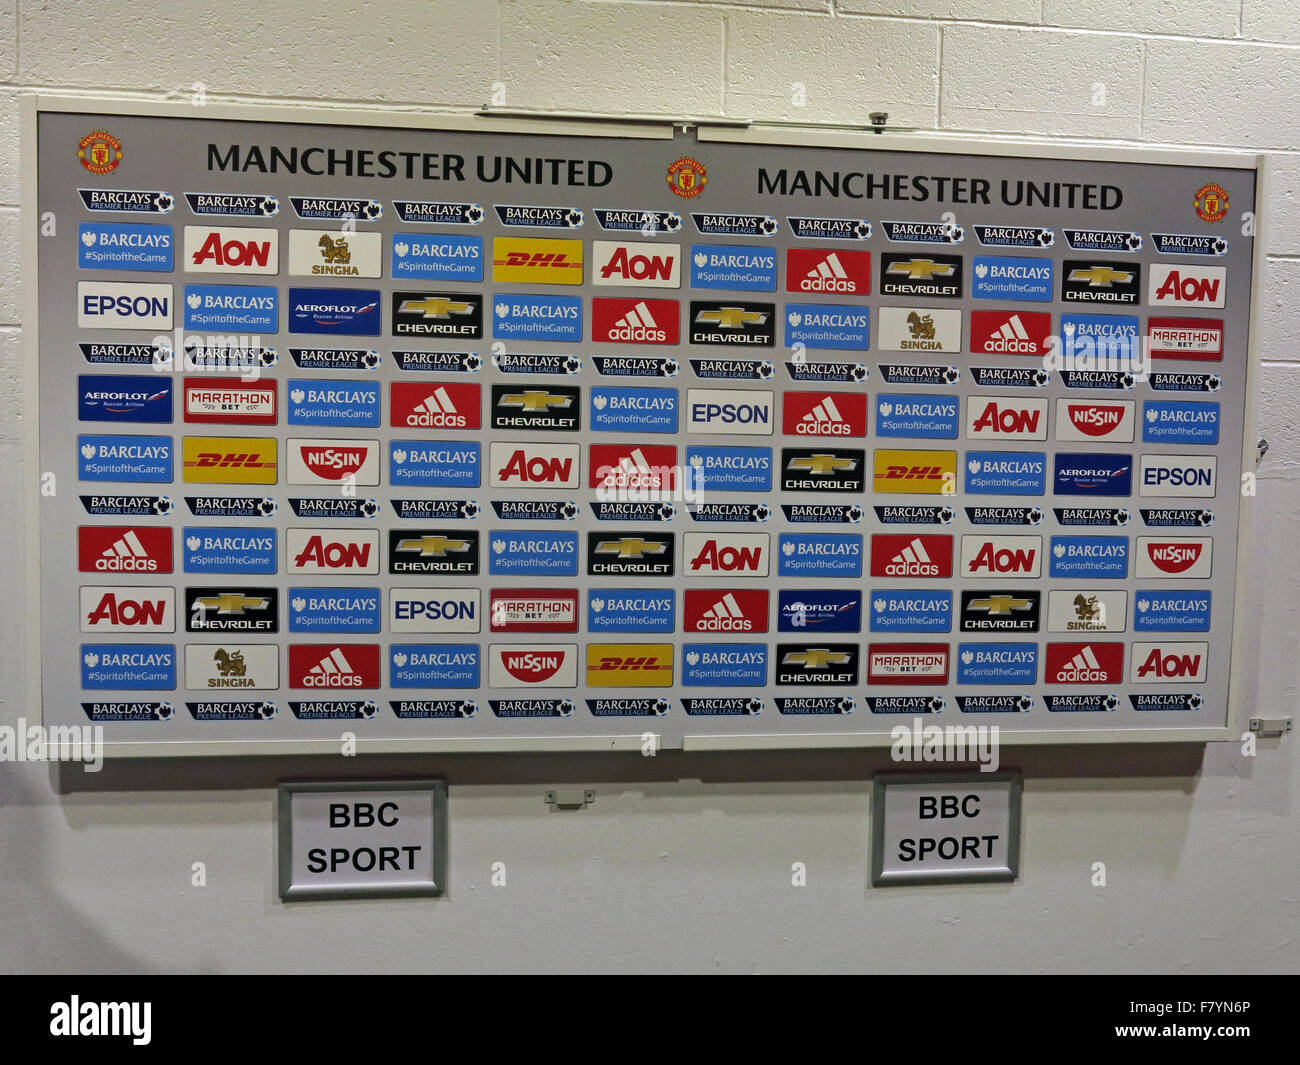 MUFC, BBC Sport, Manchester United interview Board, Old Trafford, England, UK Stockfoto